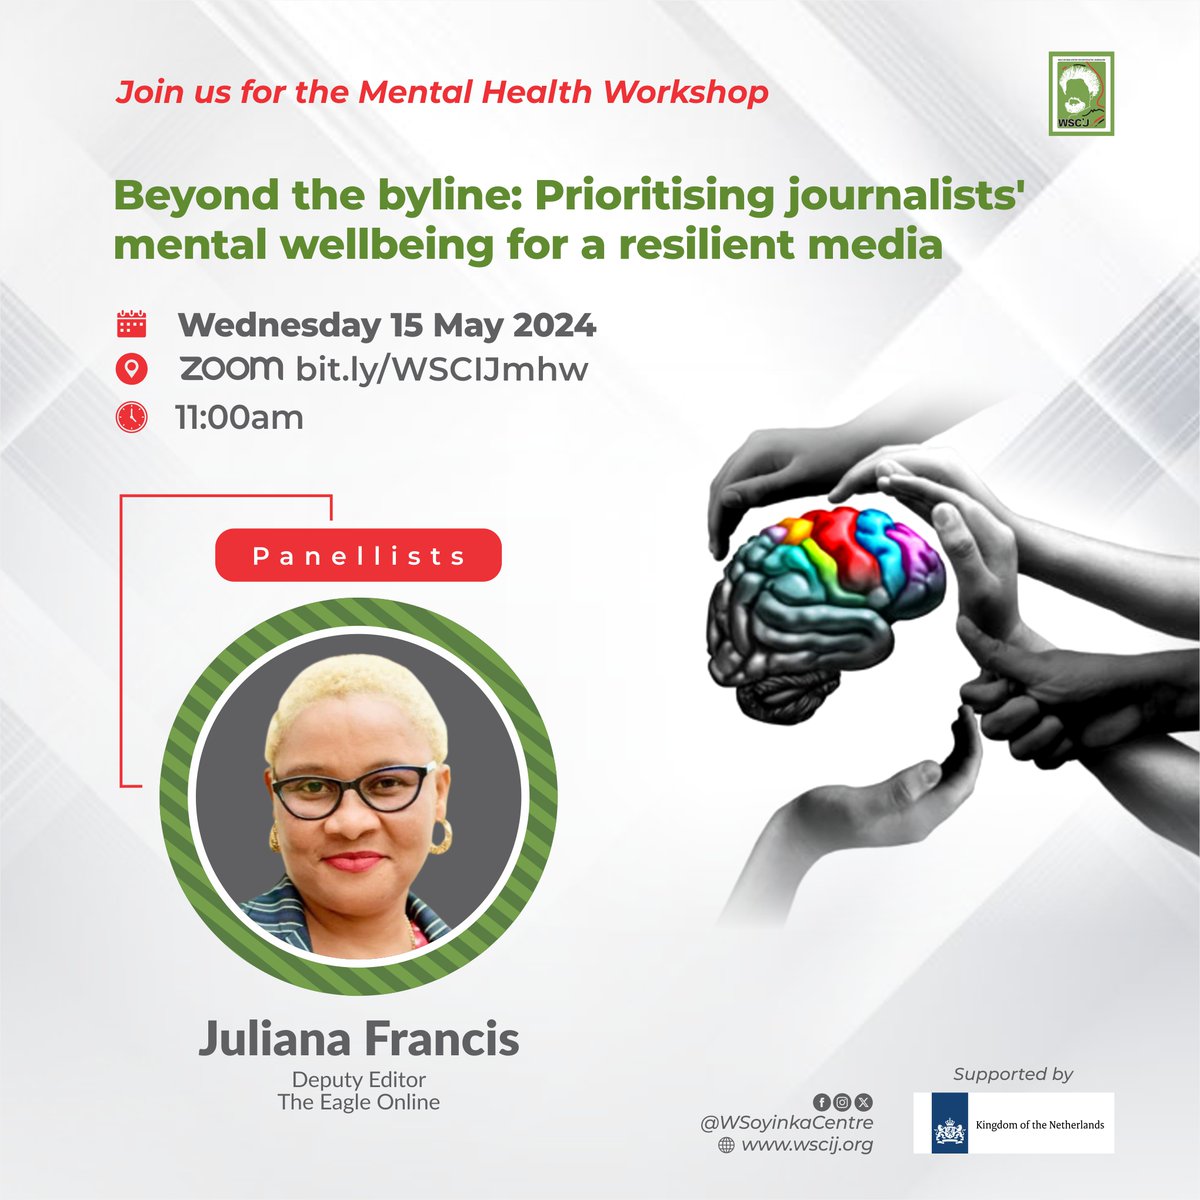 Come and learn about the inner workings and practices of the newsroom and how these influence the ability of investigative journalists to engage in rigorous investigative work. Join @julianafrancis at the @WSoyinkaCentre's #MentalHealth workshop for more. bit.ly/WSCIJmhw